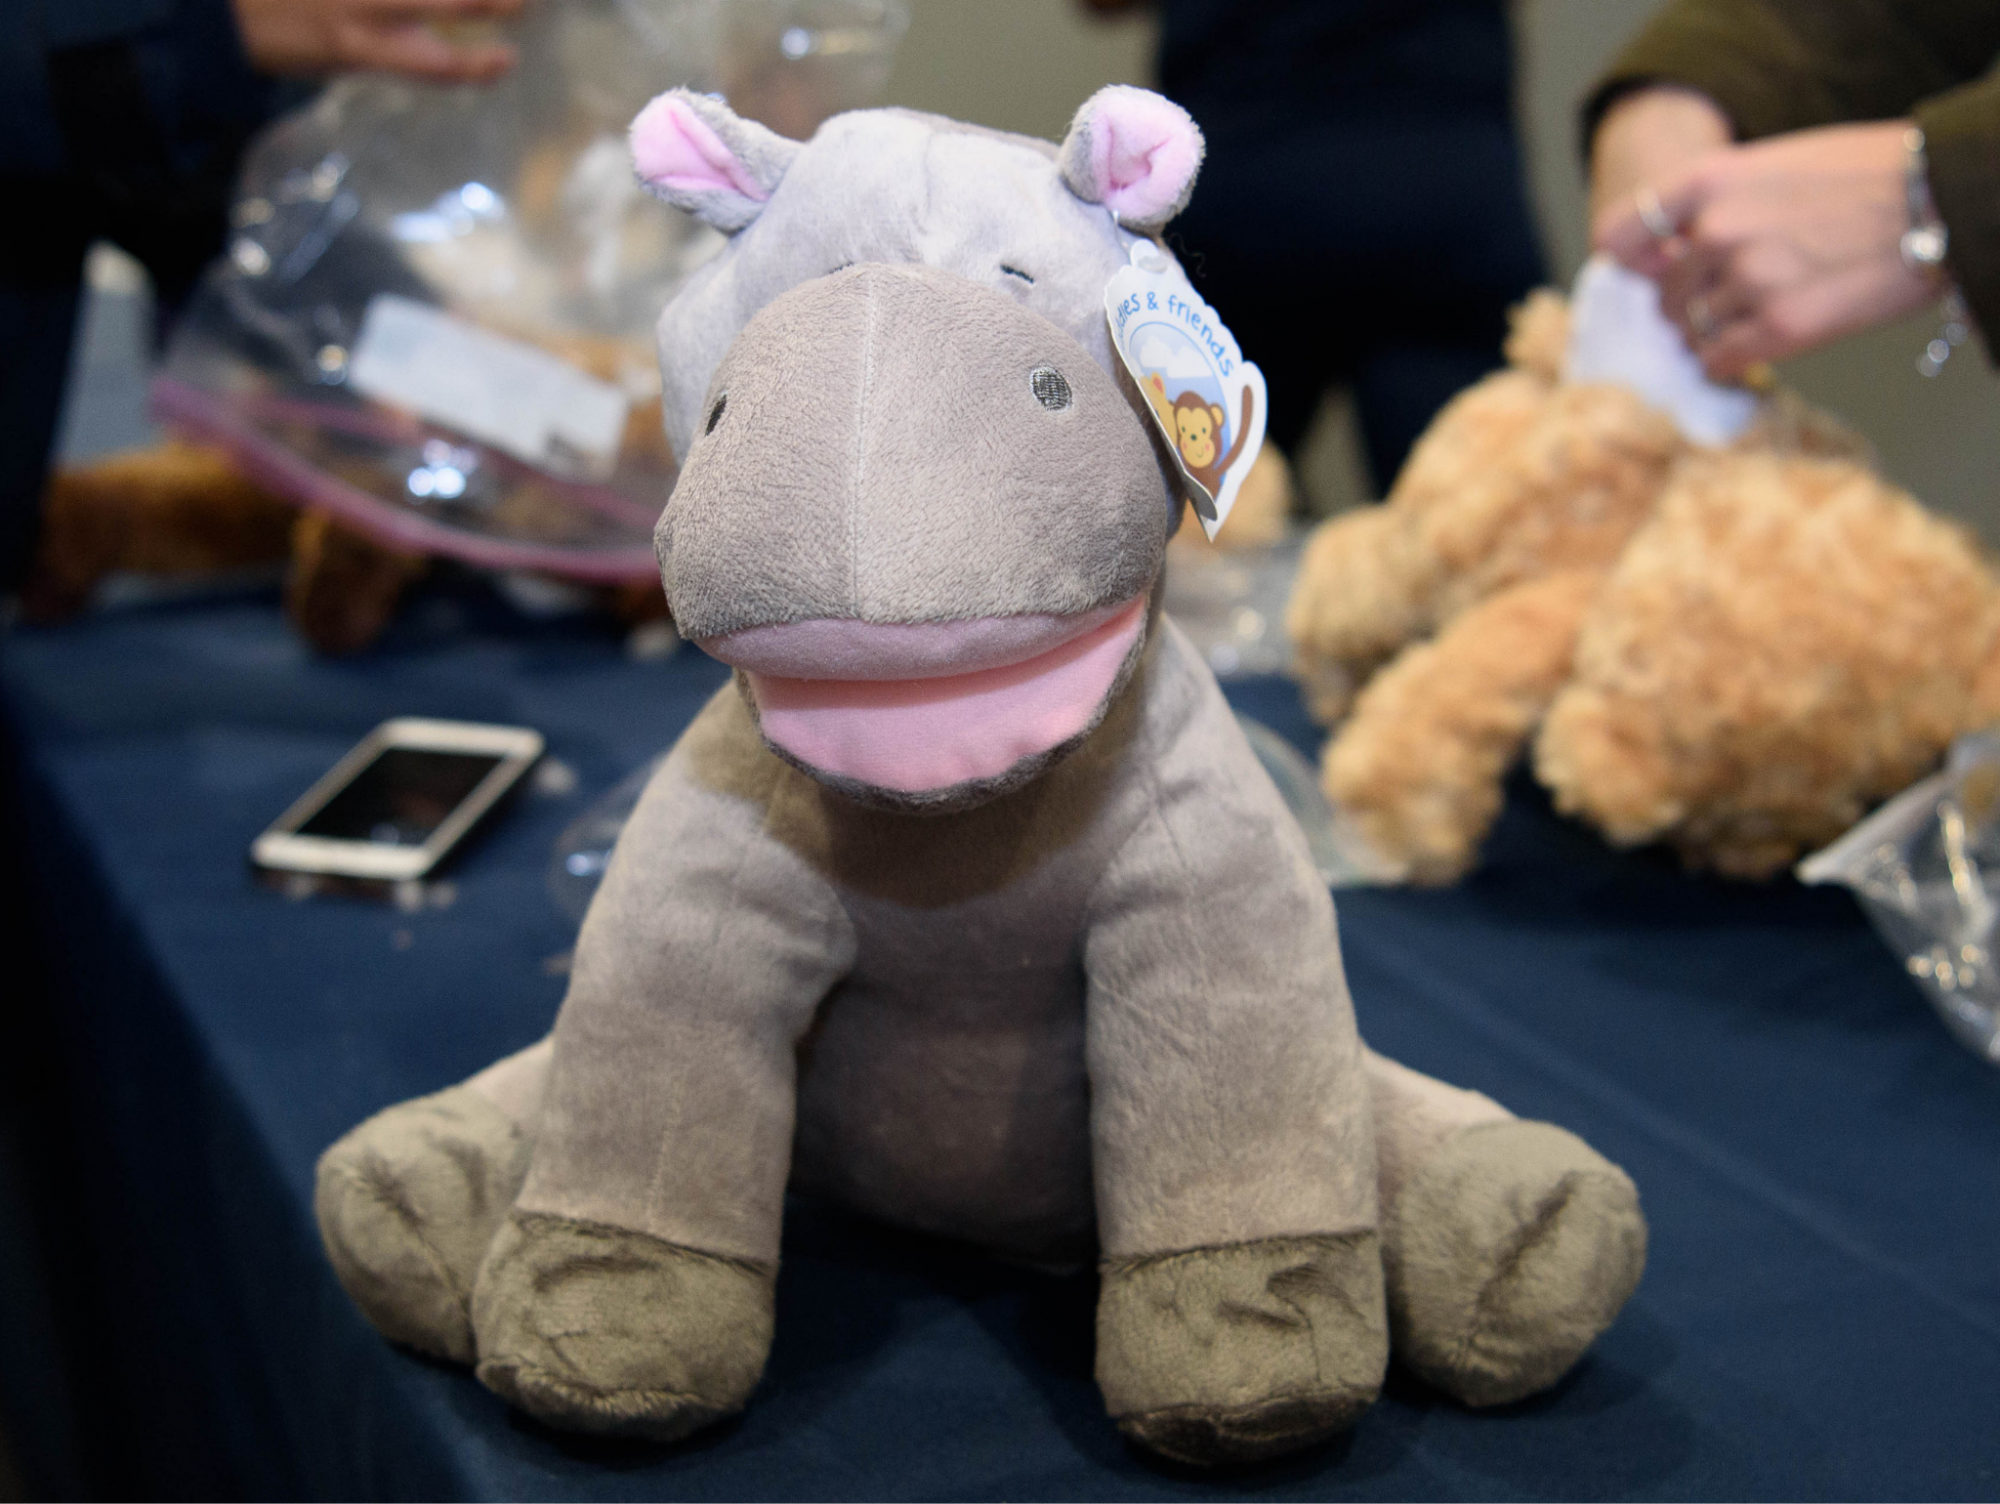 Plush hippo resting on a table